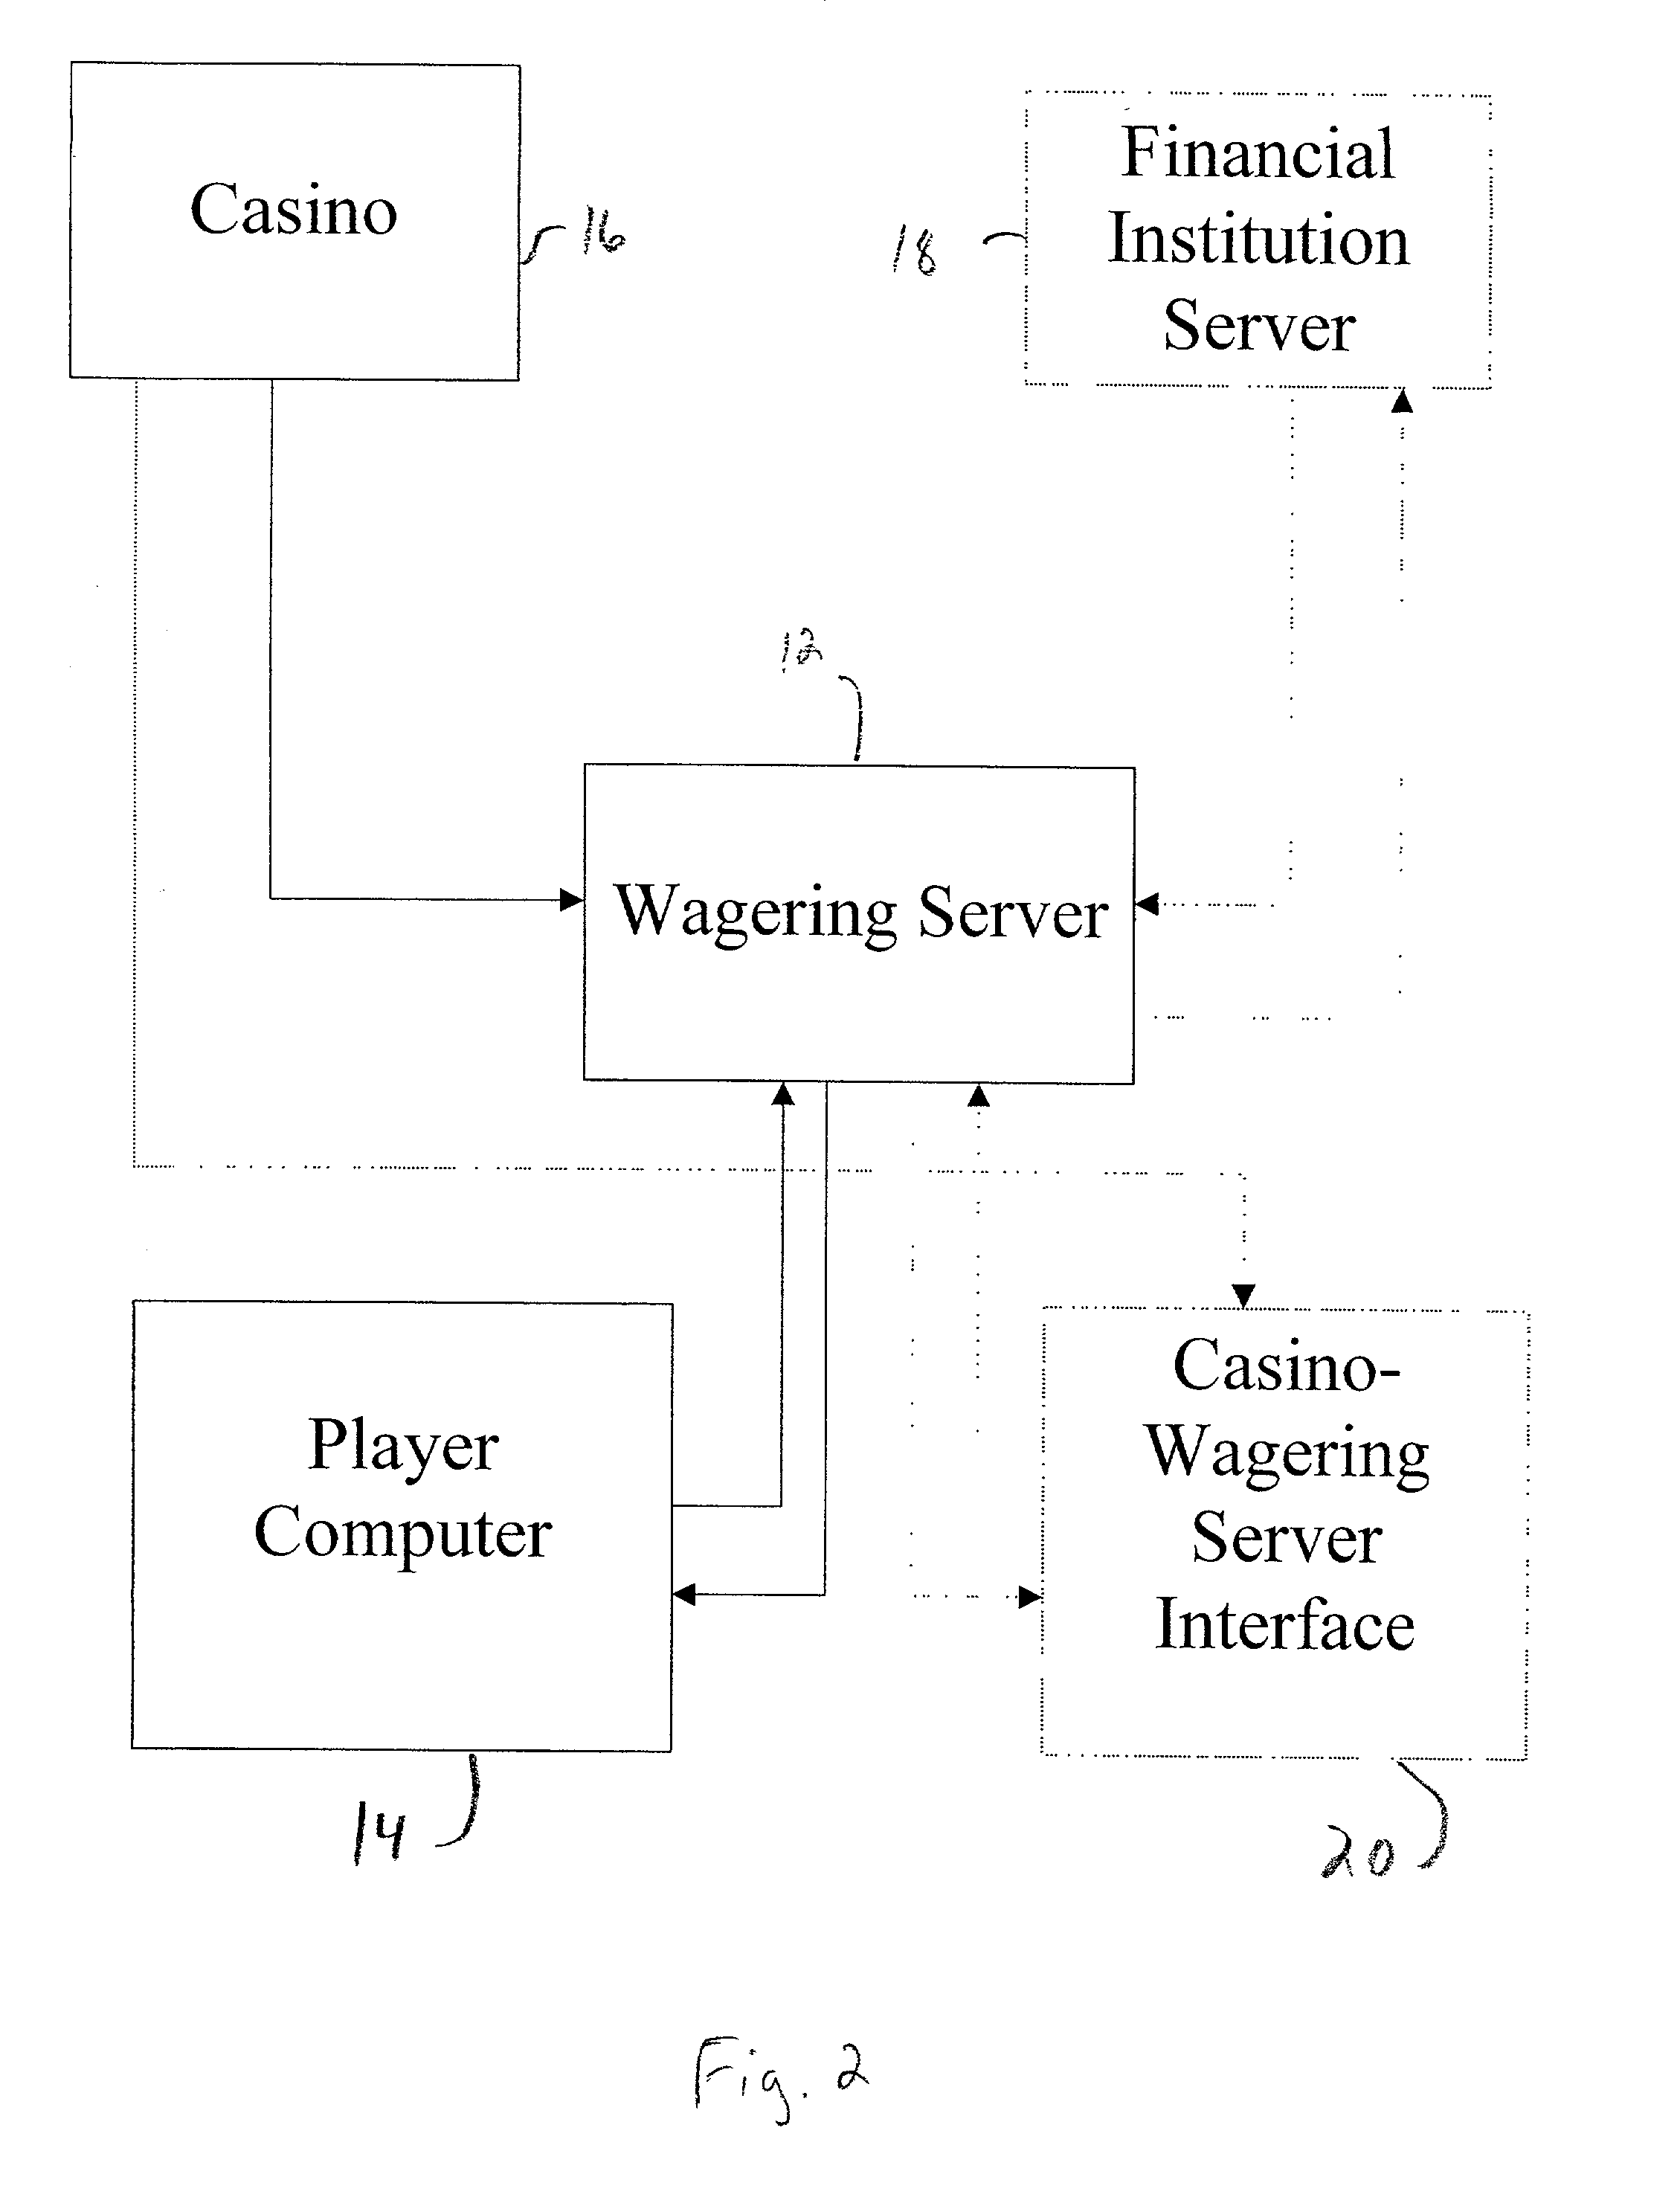 Networked casino gaming system and method of participation